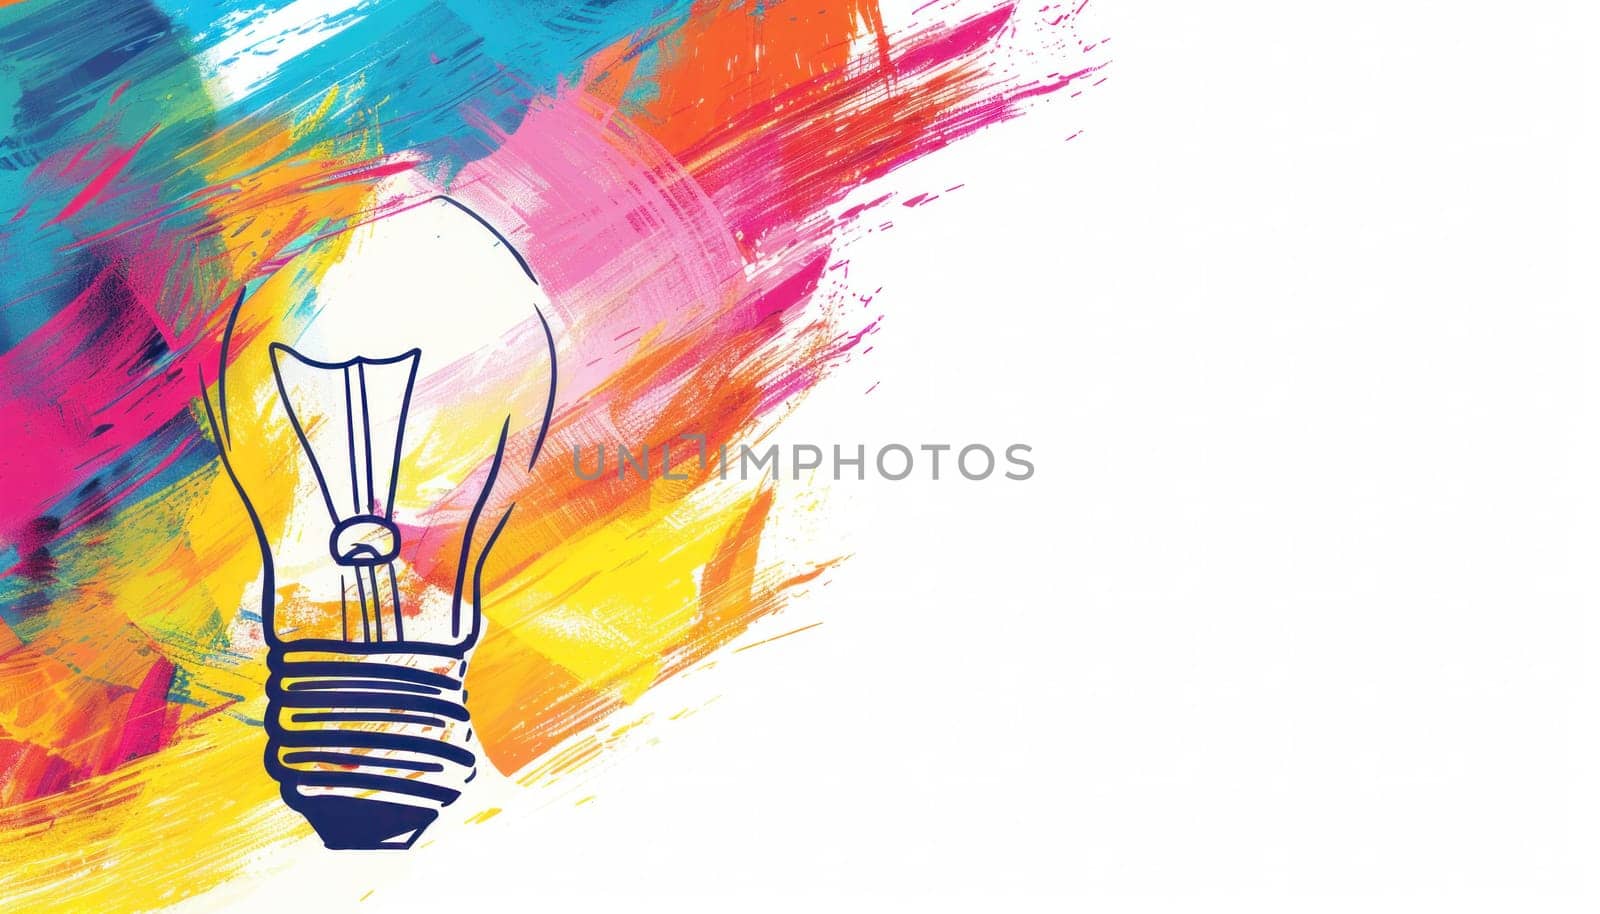 Abstract painting of a radiant lightbulb on white background with delicate paint splatters and swirls of color